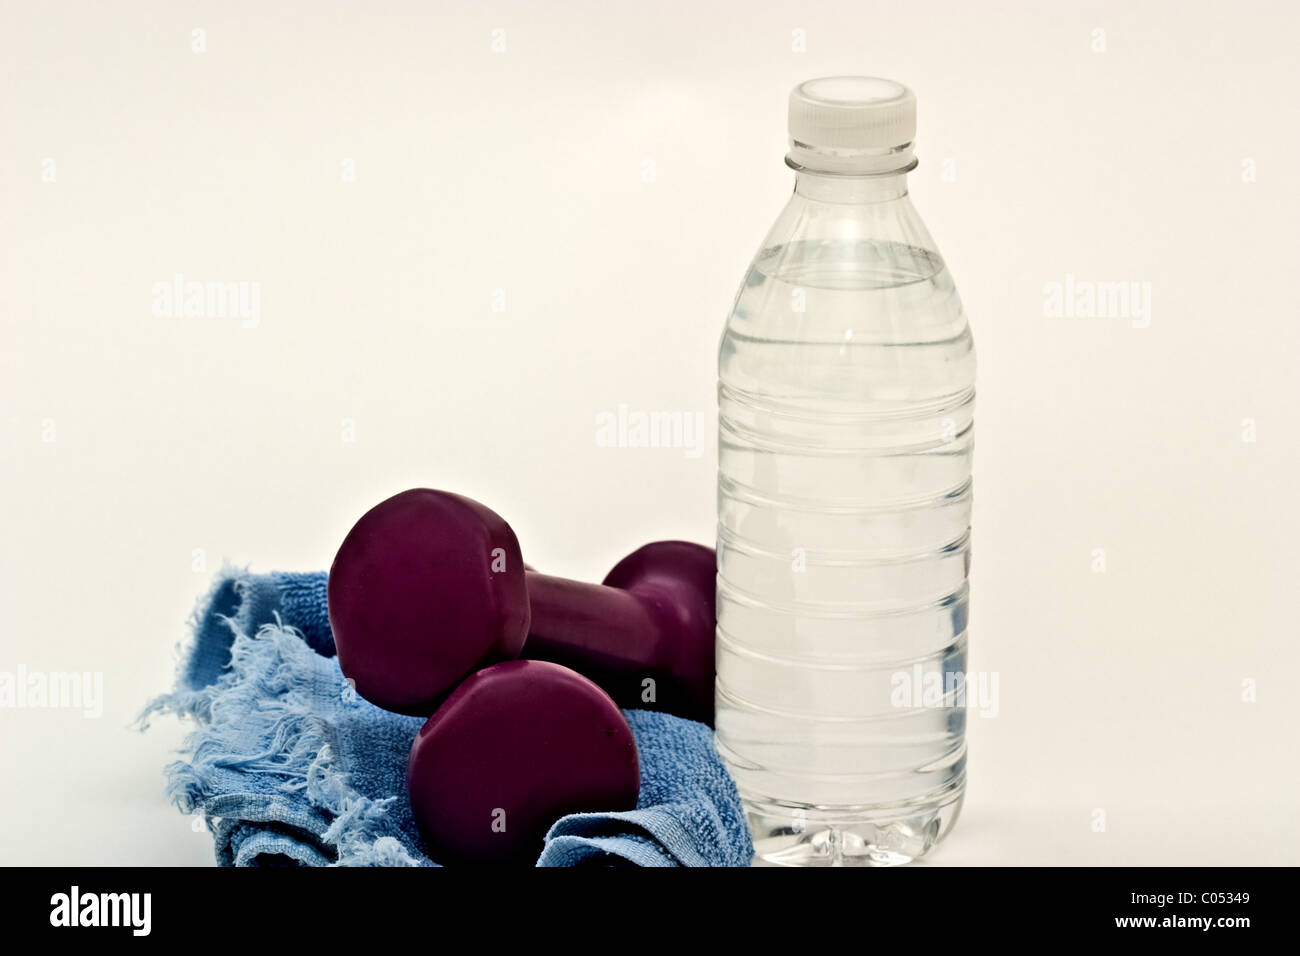 A dumbbell on a sweat towel next to a bottle of water Stock Photo